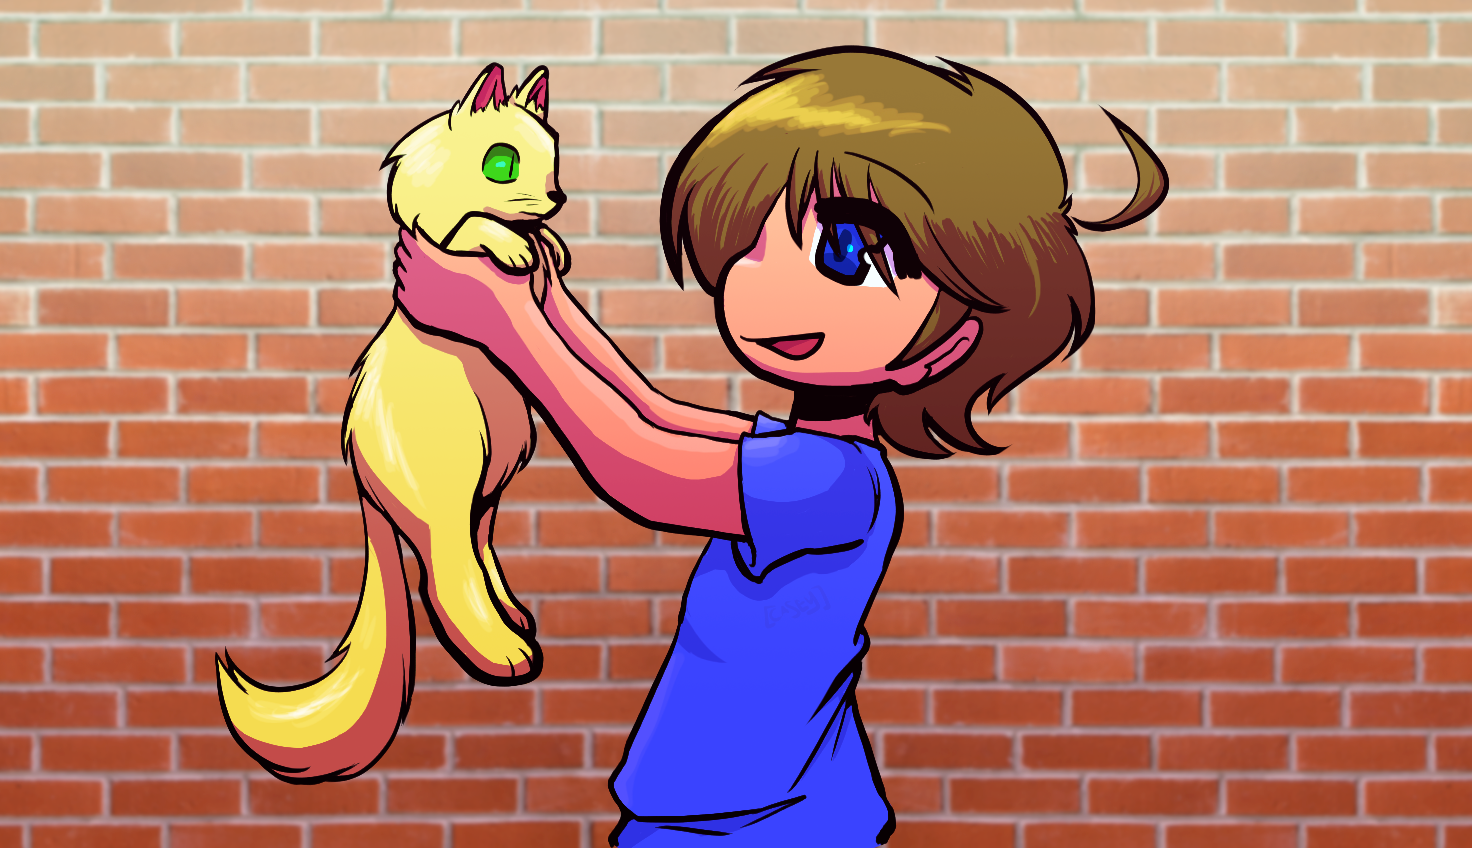 2000s anime style illustration of joseph from roommates holding up his cat fluffy while smiling in front of a brick wall background